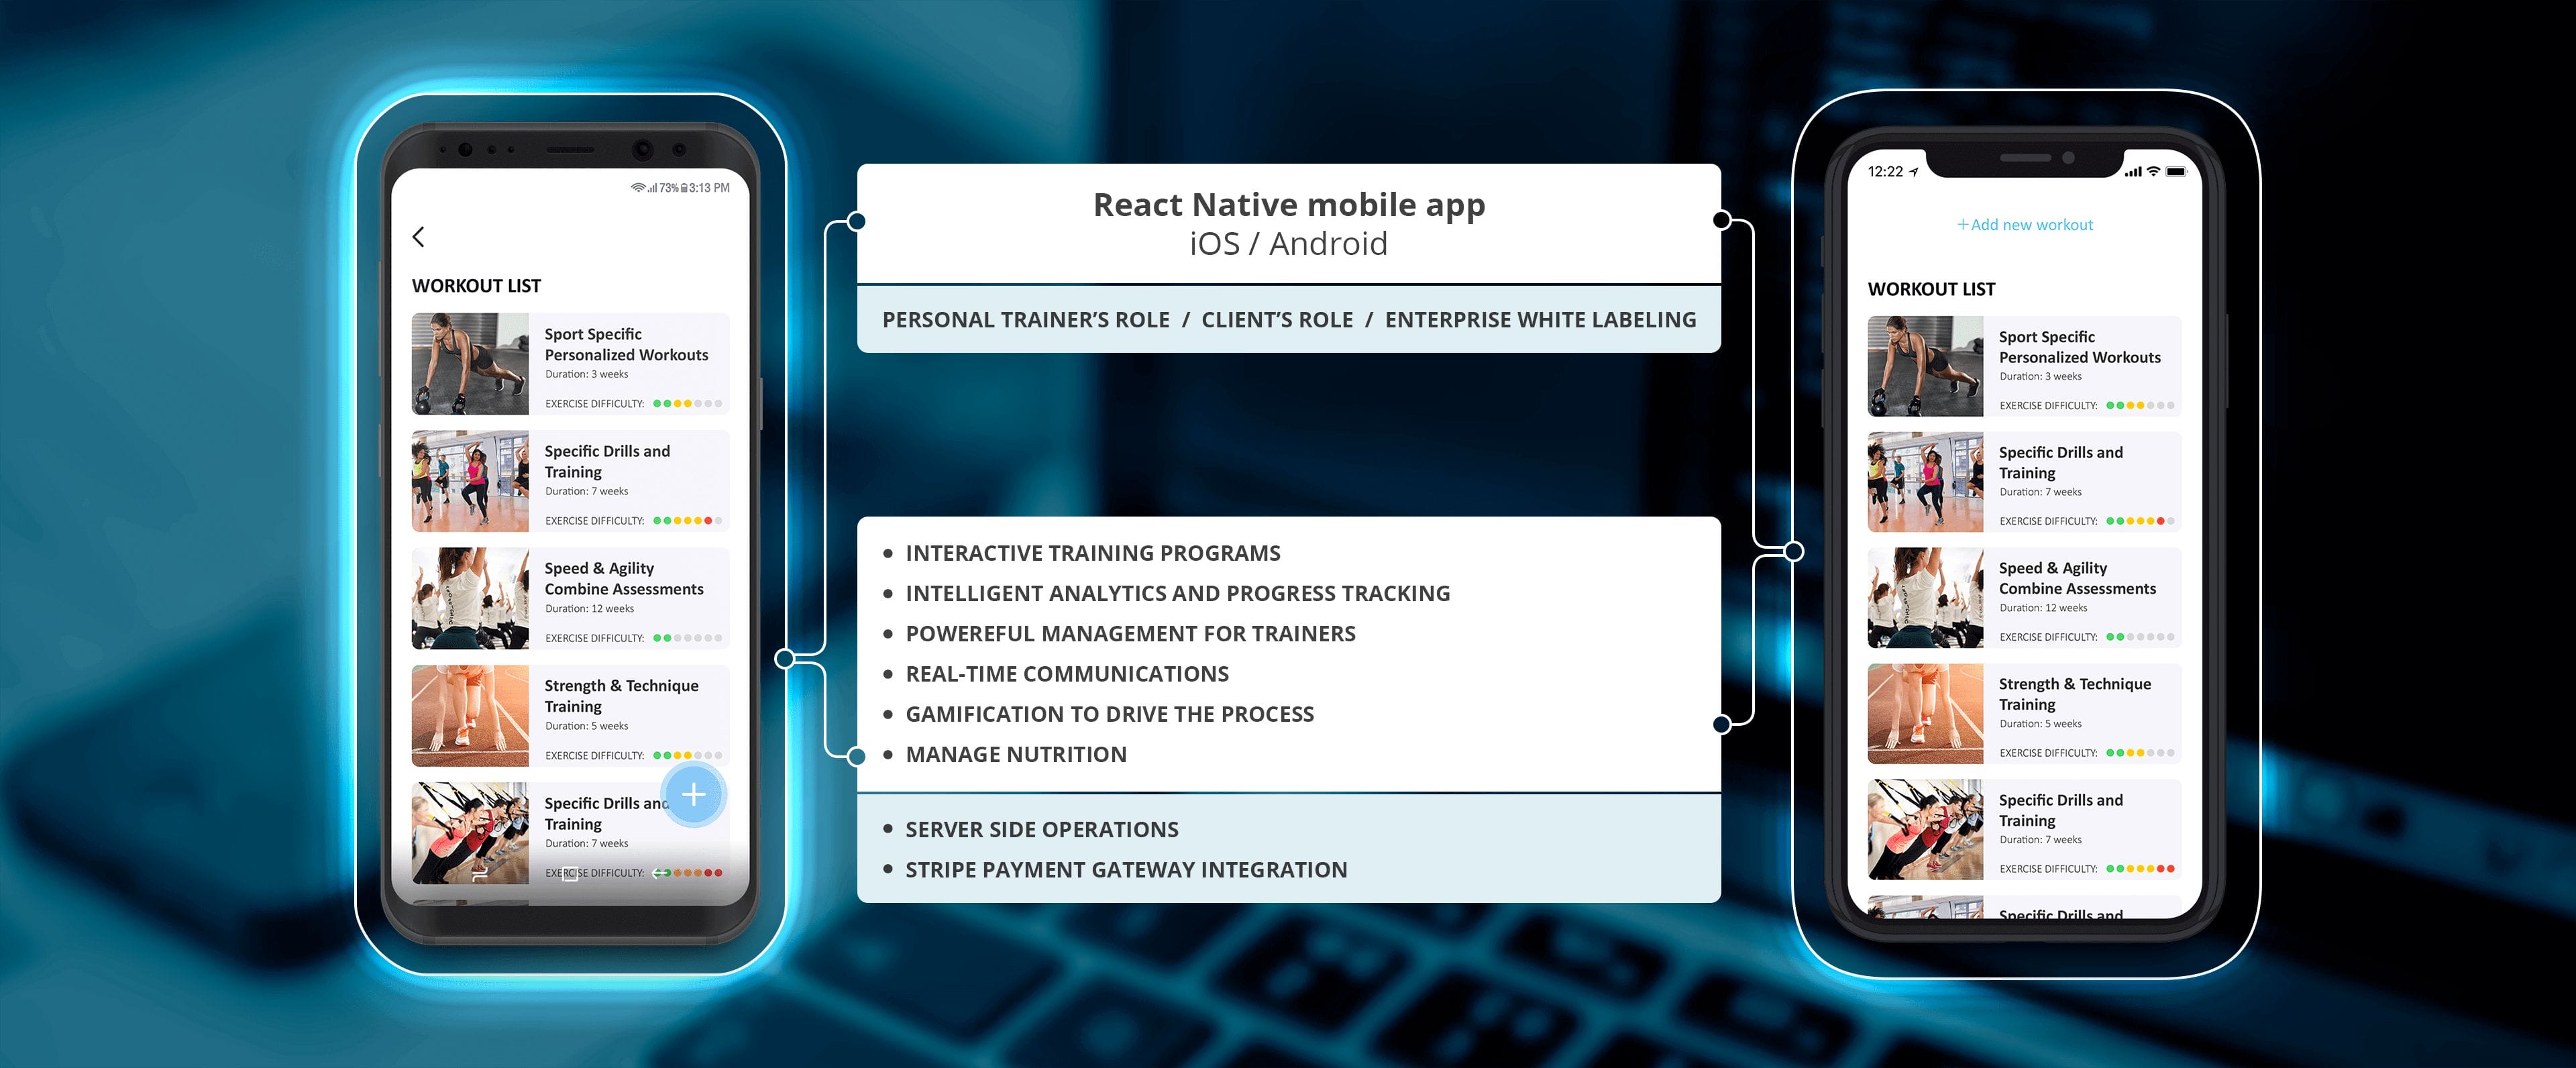 Cross-platform development with React Native saved the client up to 80% of the efforts